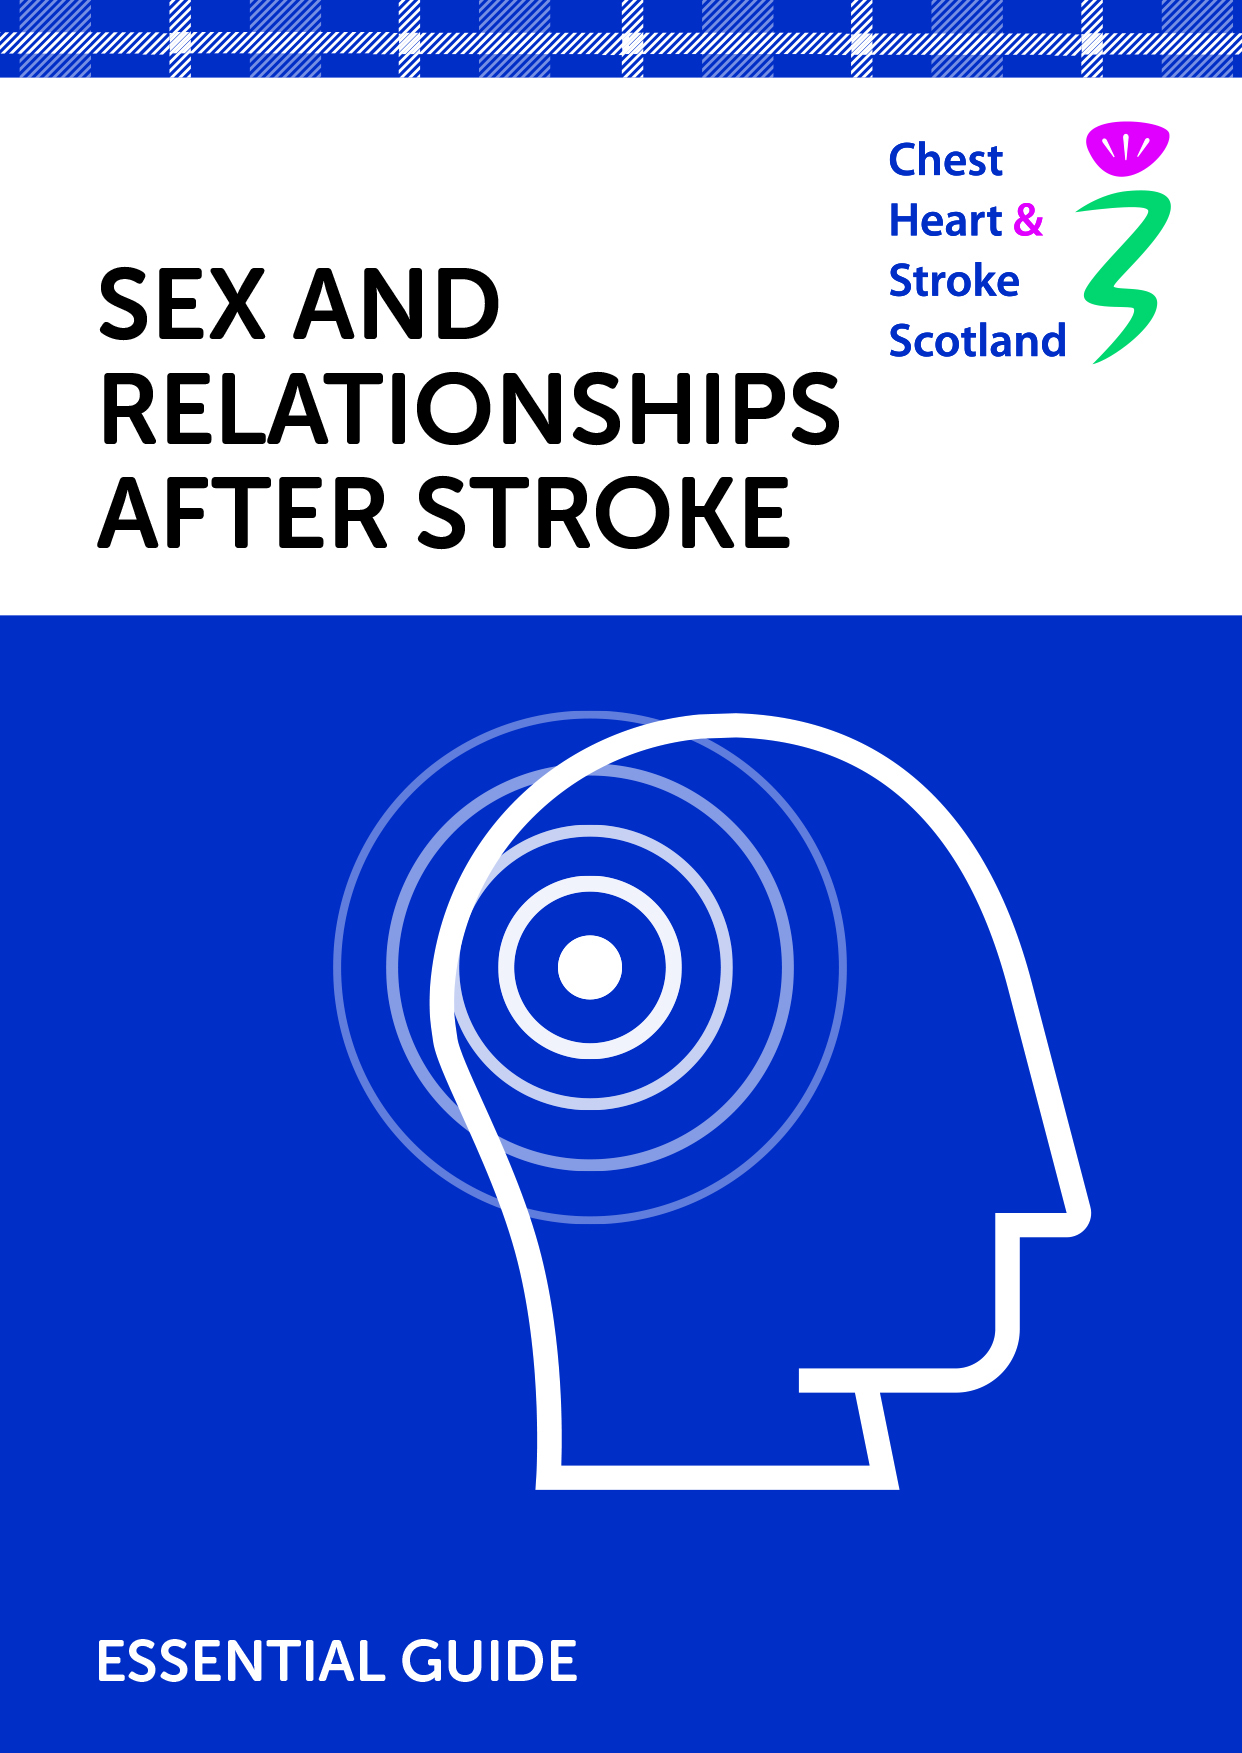 Sex And Relationships After Stroke E30 Chss Online